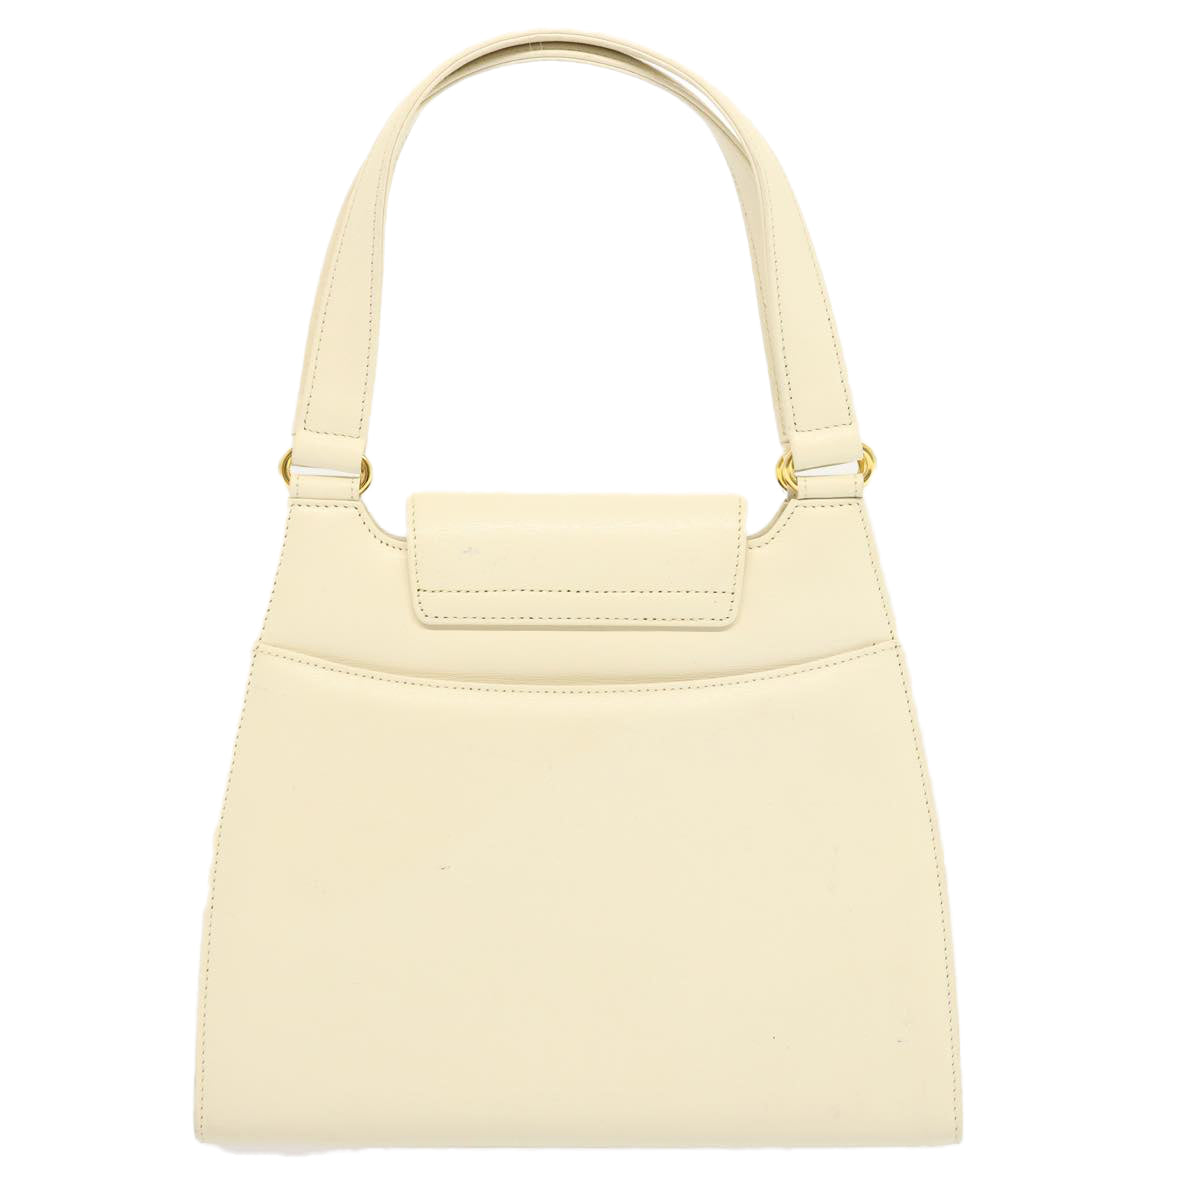 GIVENCHY Hand Bag Leather White Auth bs13388